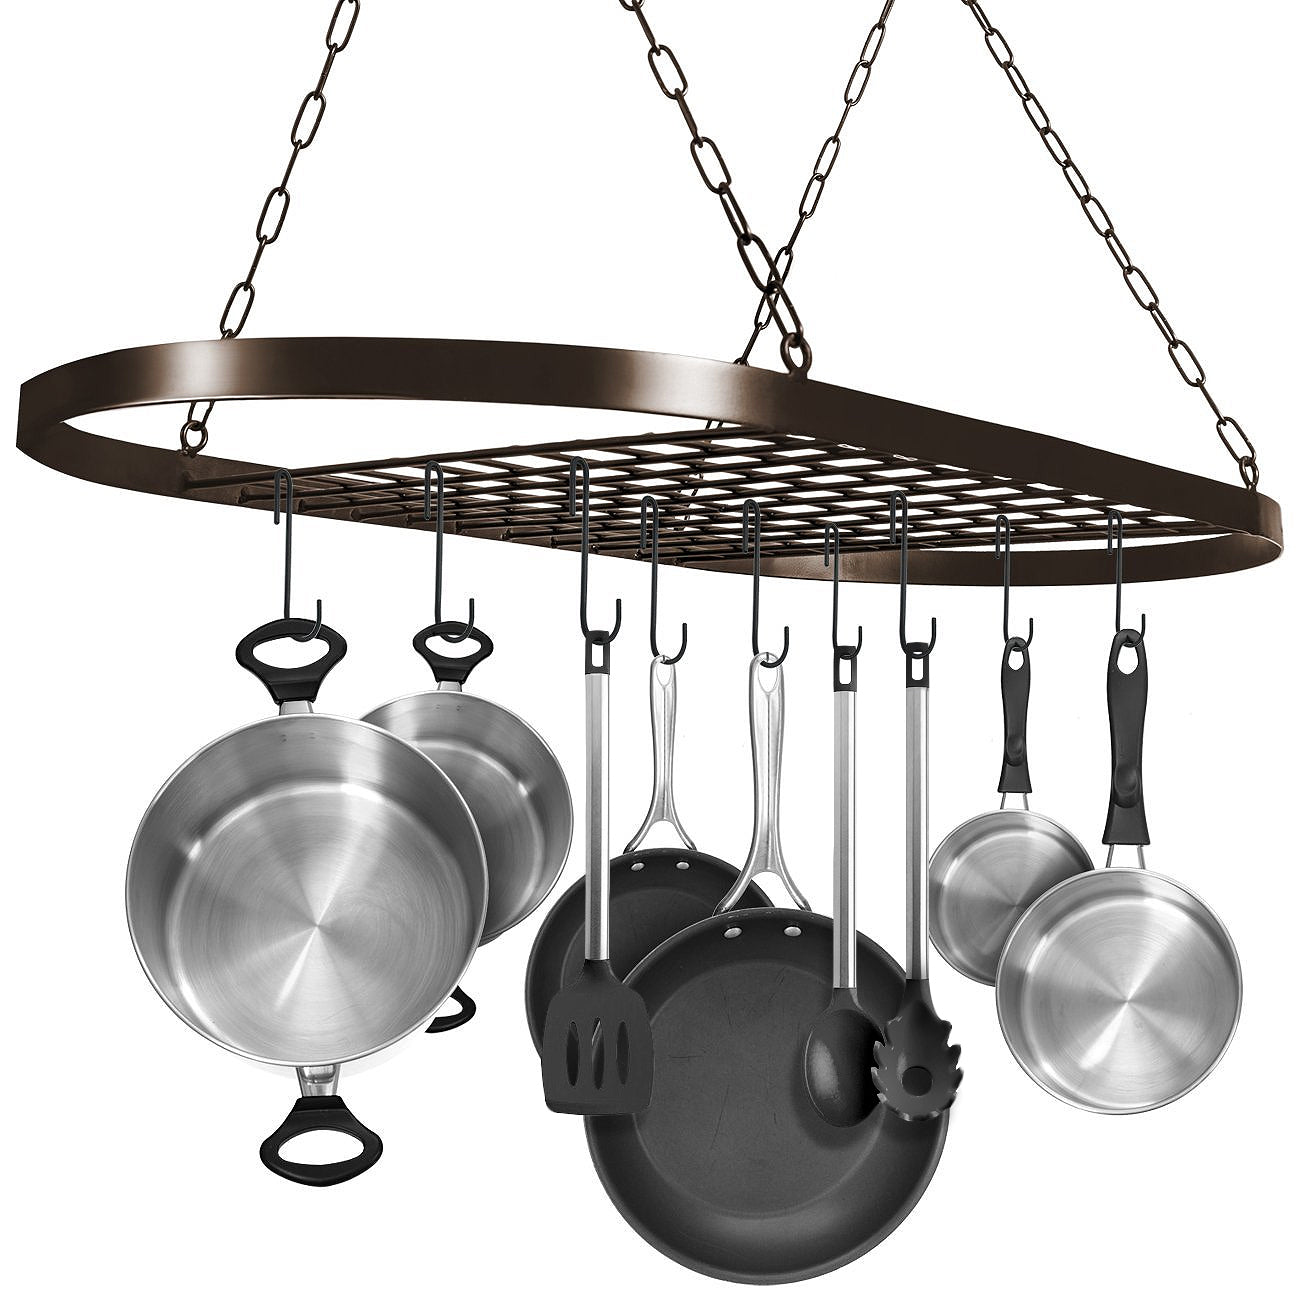 Pot and Pan Rack for Ceiling with Hooks - Bronze